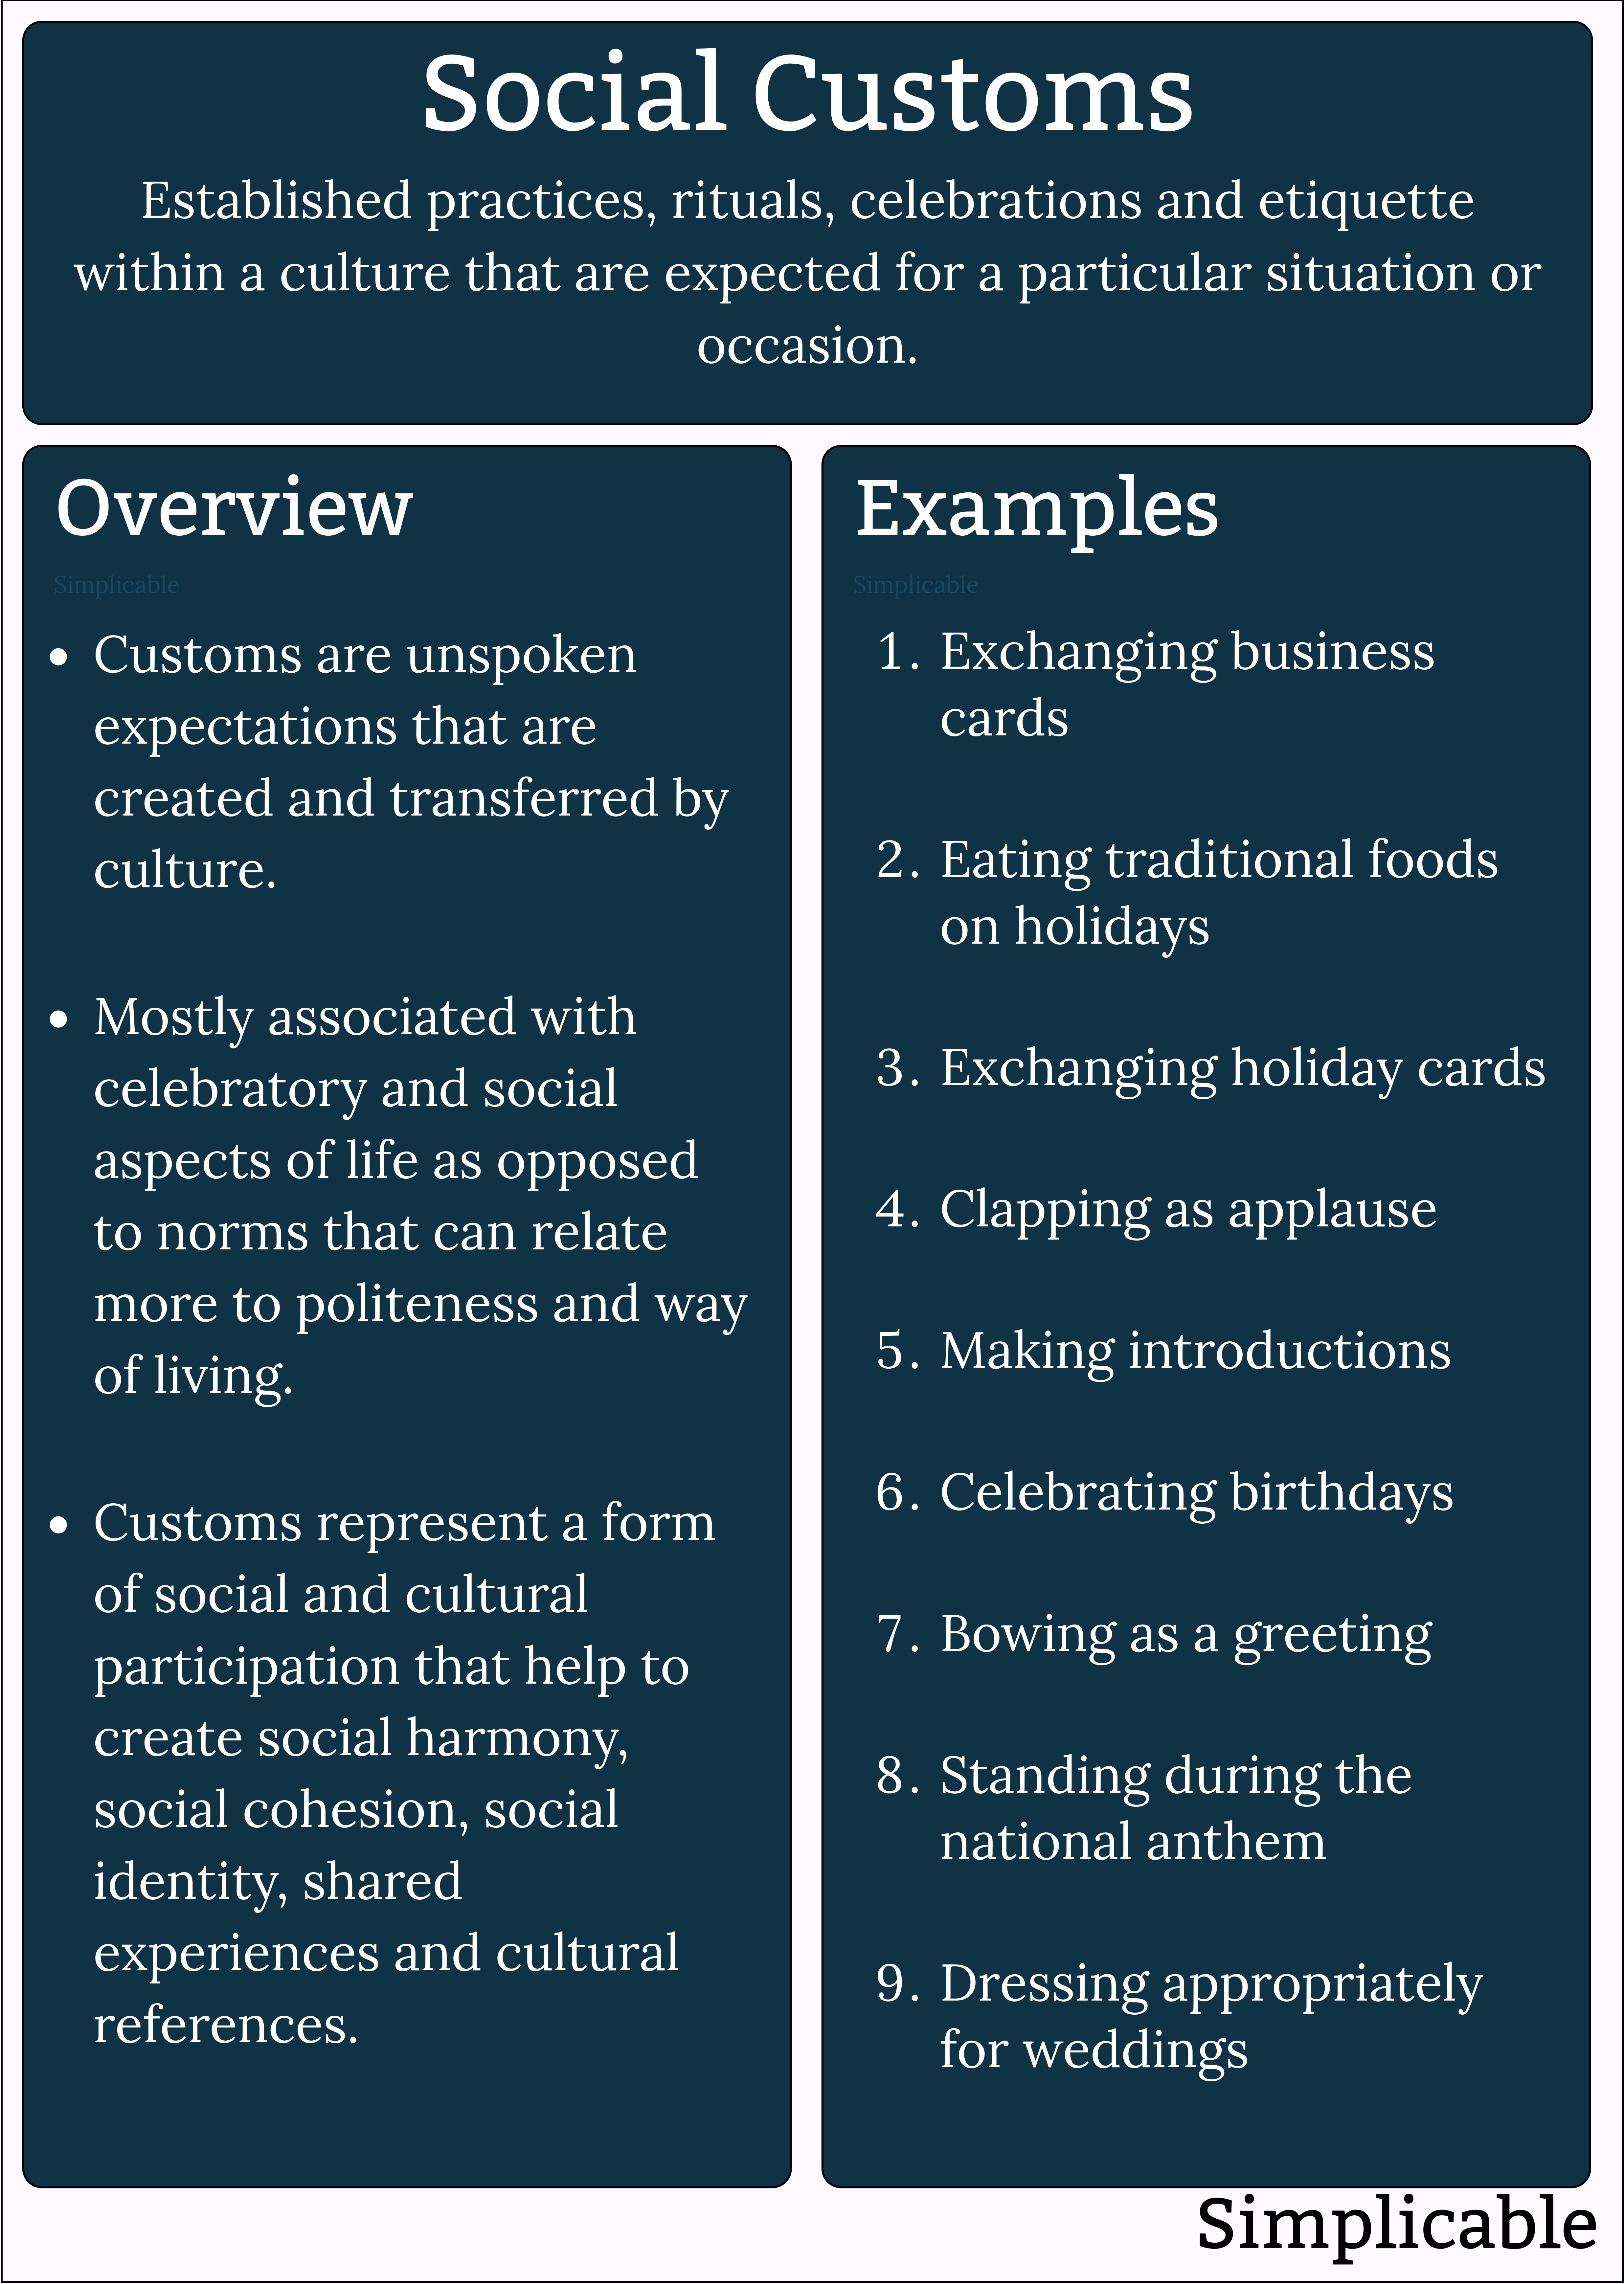 social customs overview and examples